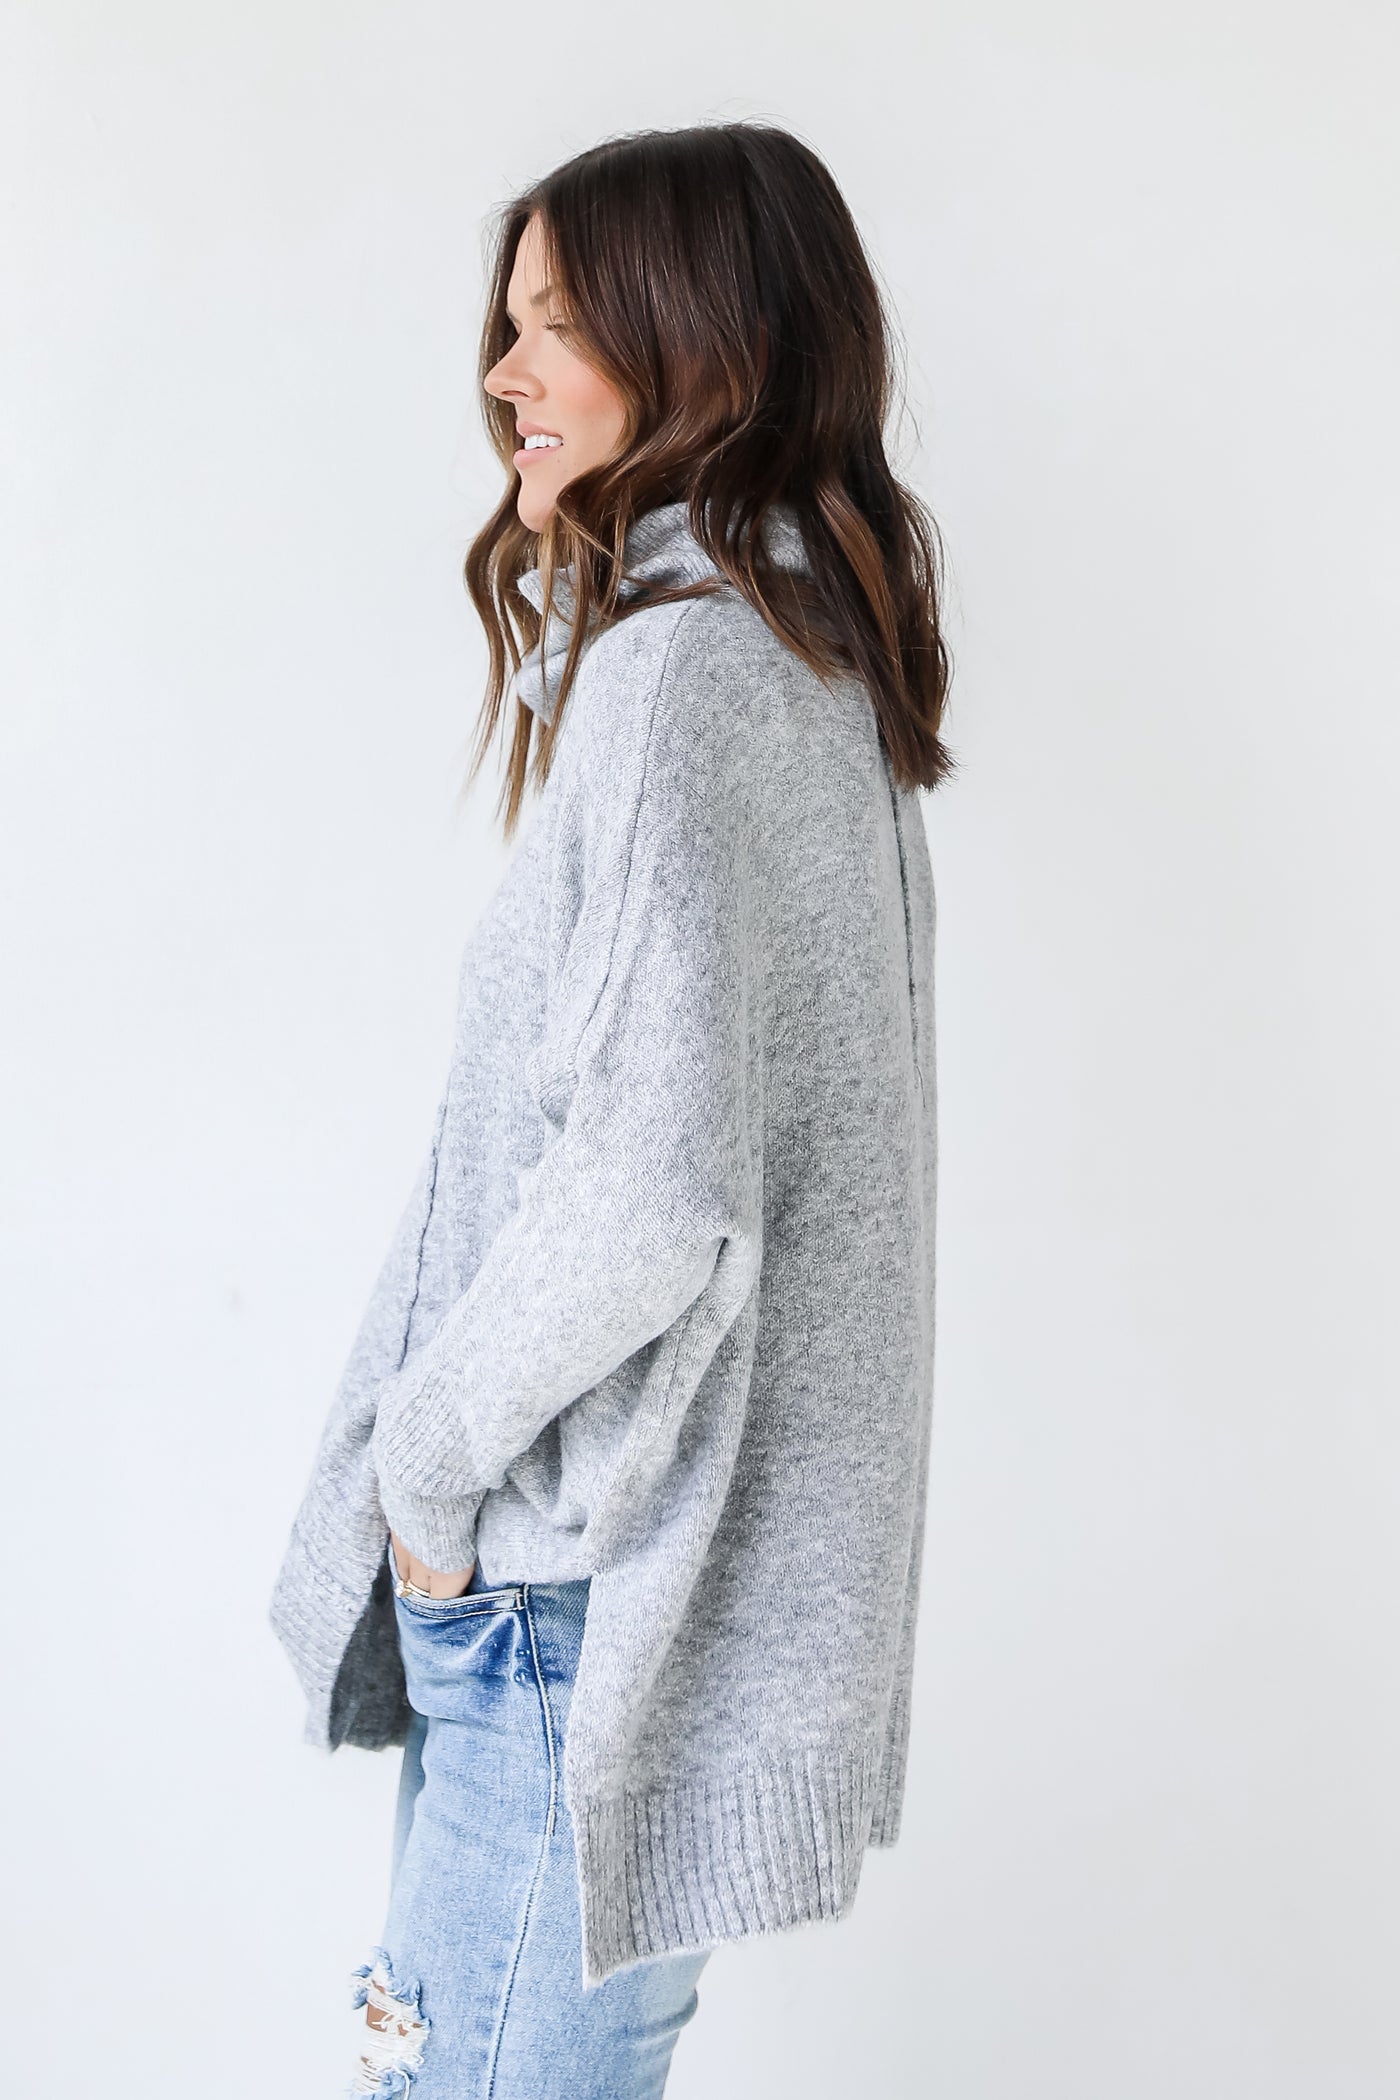 Sweater in heather grey side view